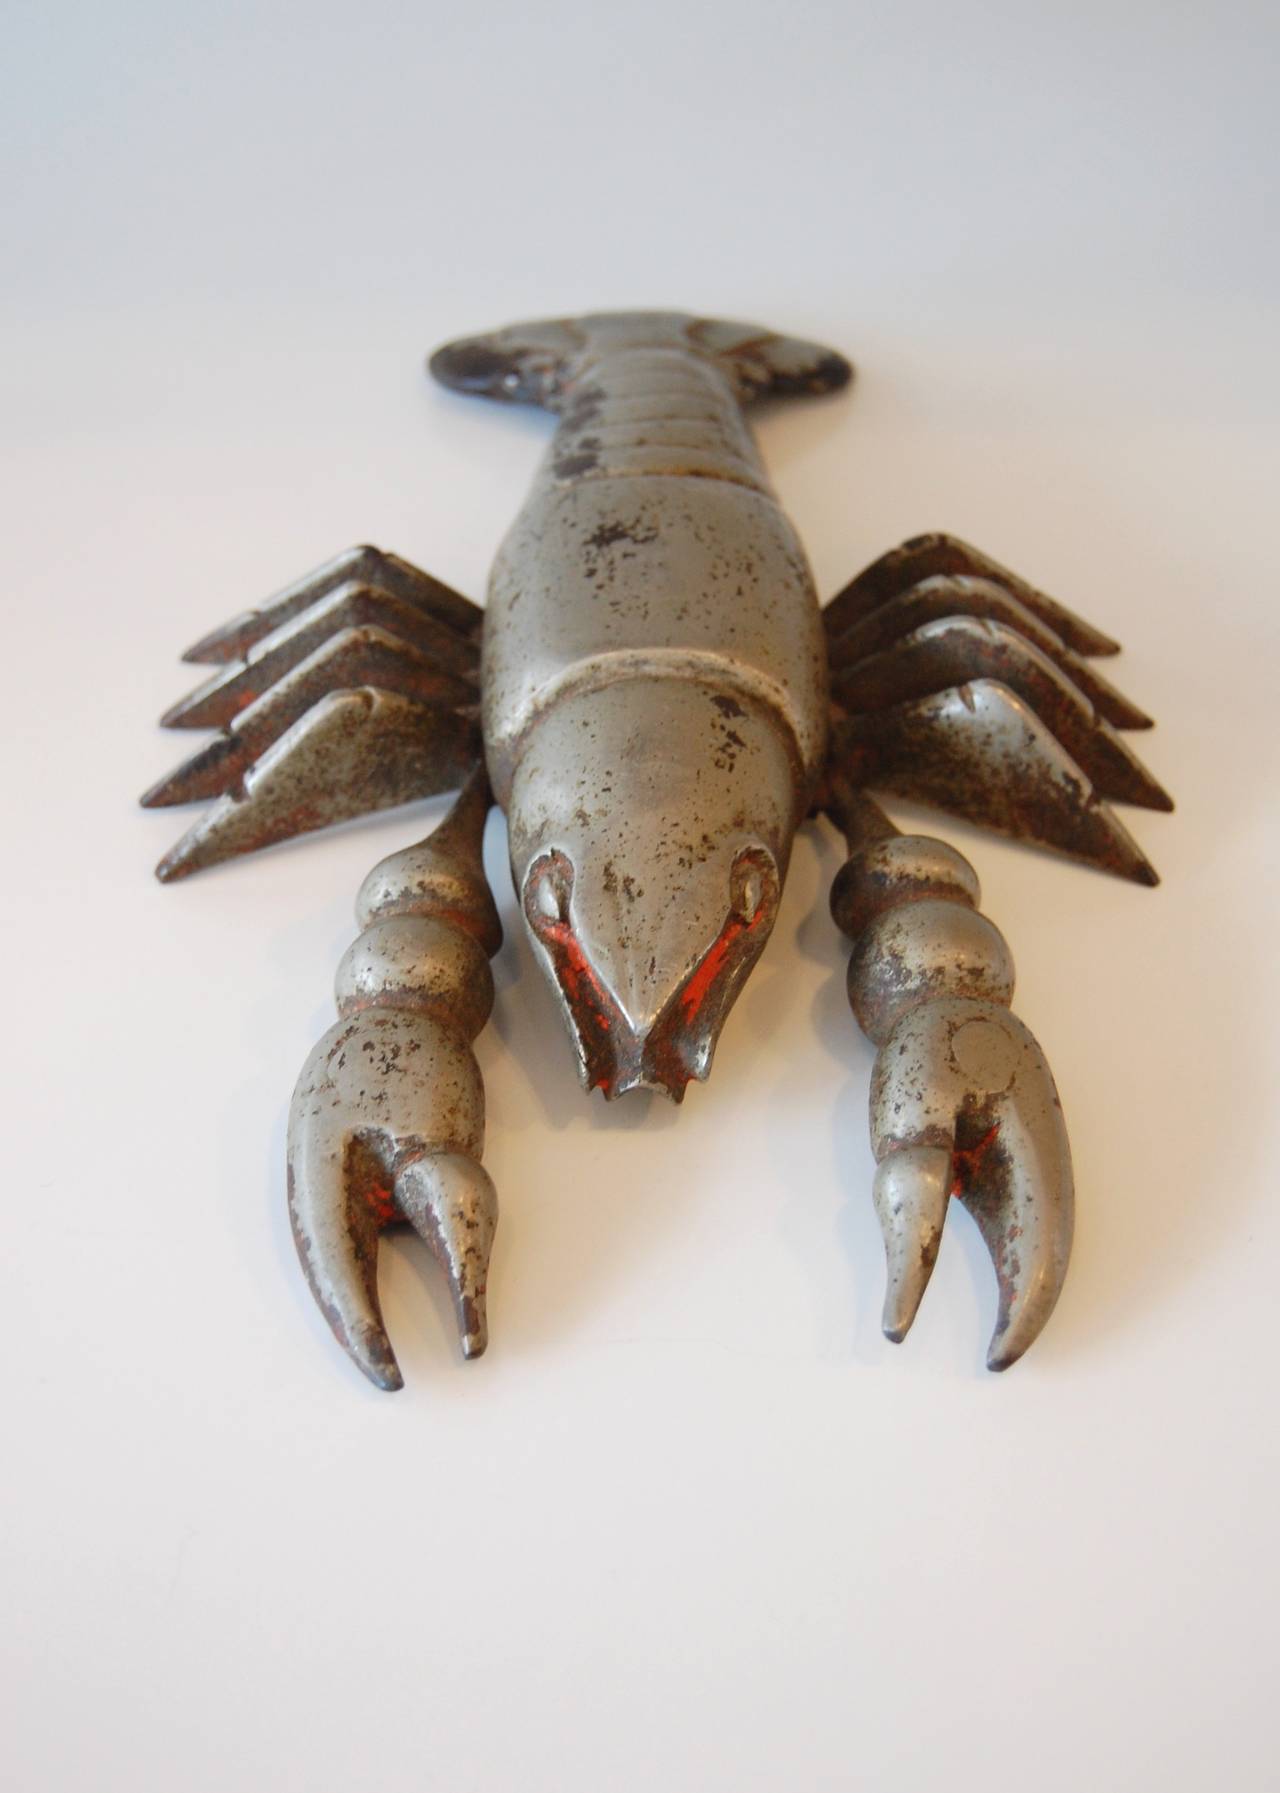 Machine Age Cast Lobster Sculpture with Articulating Claws Circa 1930s